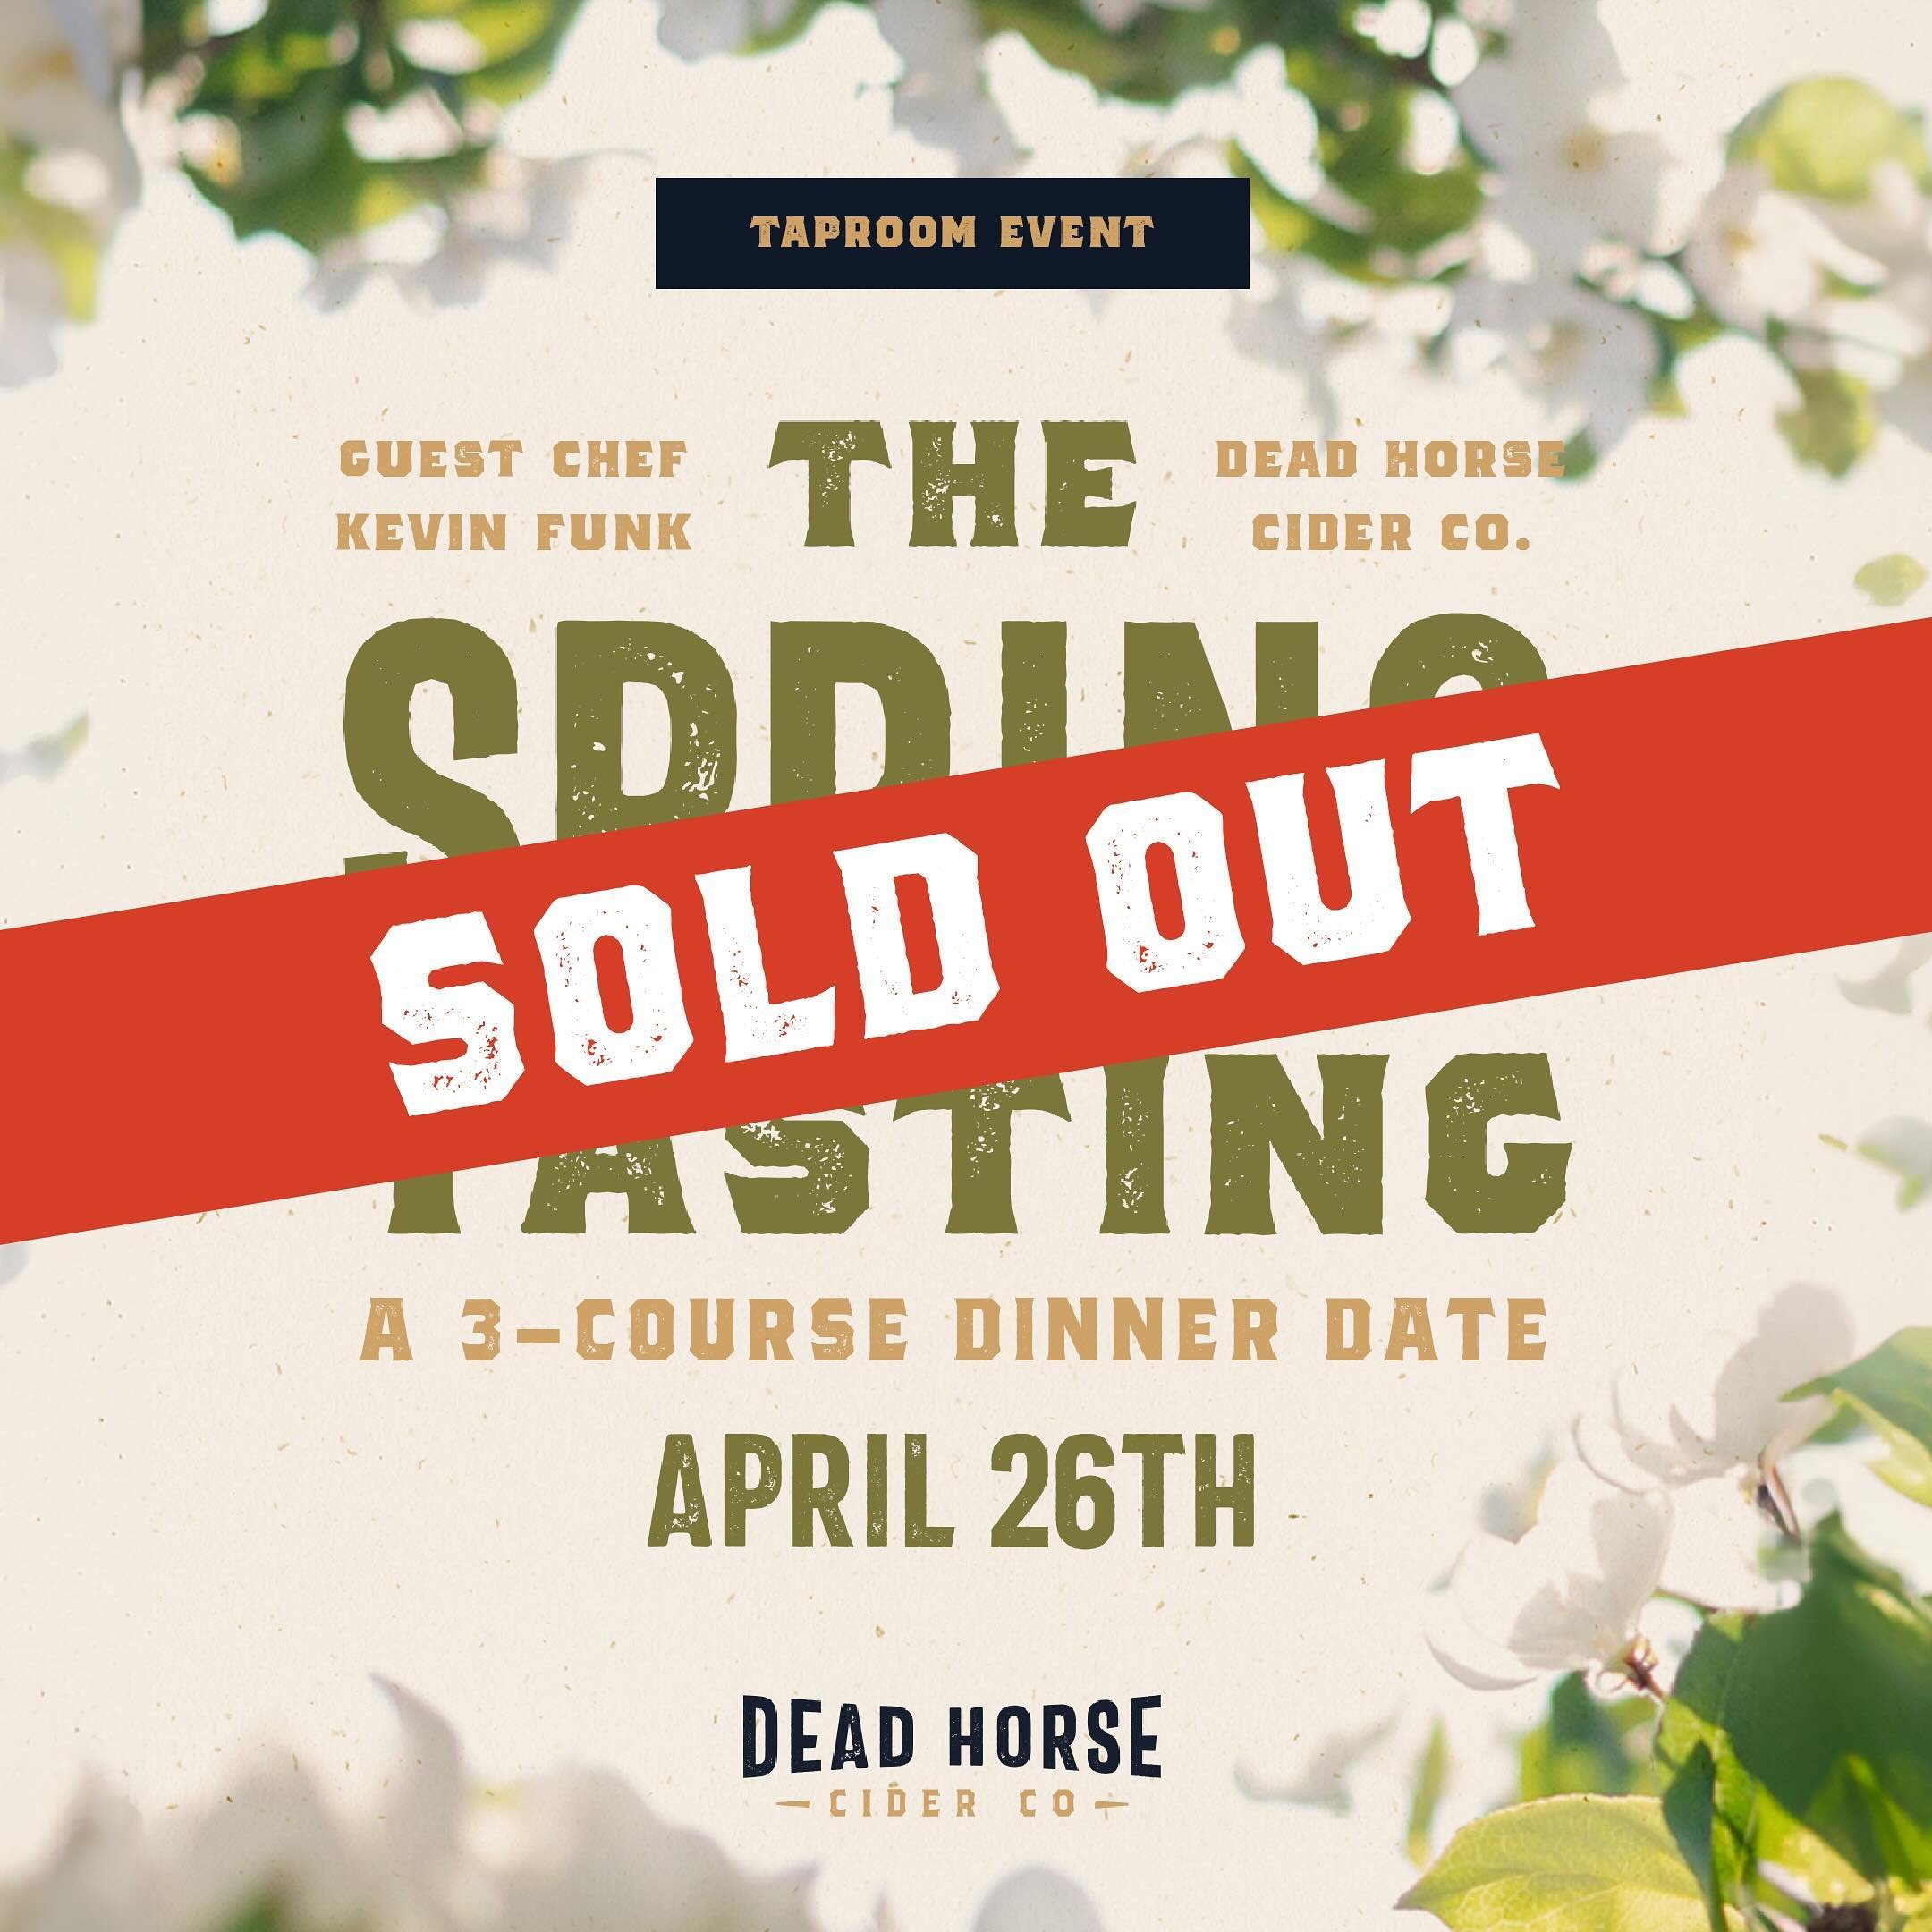 🌸 Taproom Notice! 🌸 We will be closed Friday, April 26th as we host the SOLD OUT &lsquo;Spring Tasting: A 3-Course Dinner Date&rsquo;! 🍽️✨ To all attending, get excited for a culinary journey with Guest Chef Kevin Funk. Couldn&rsquo;t make it this